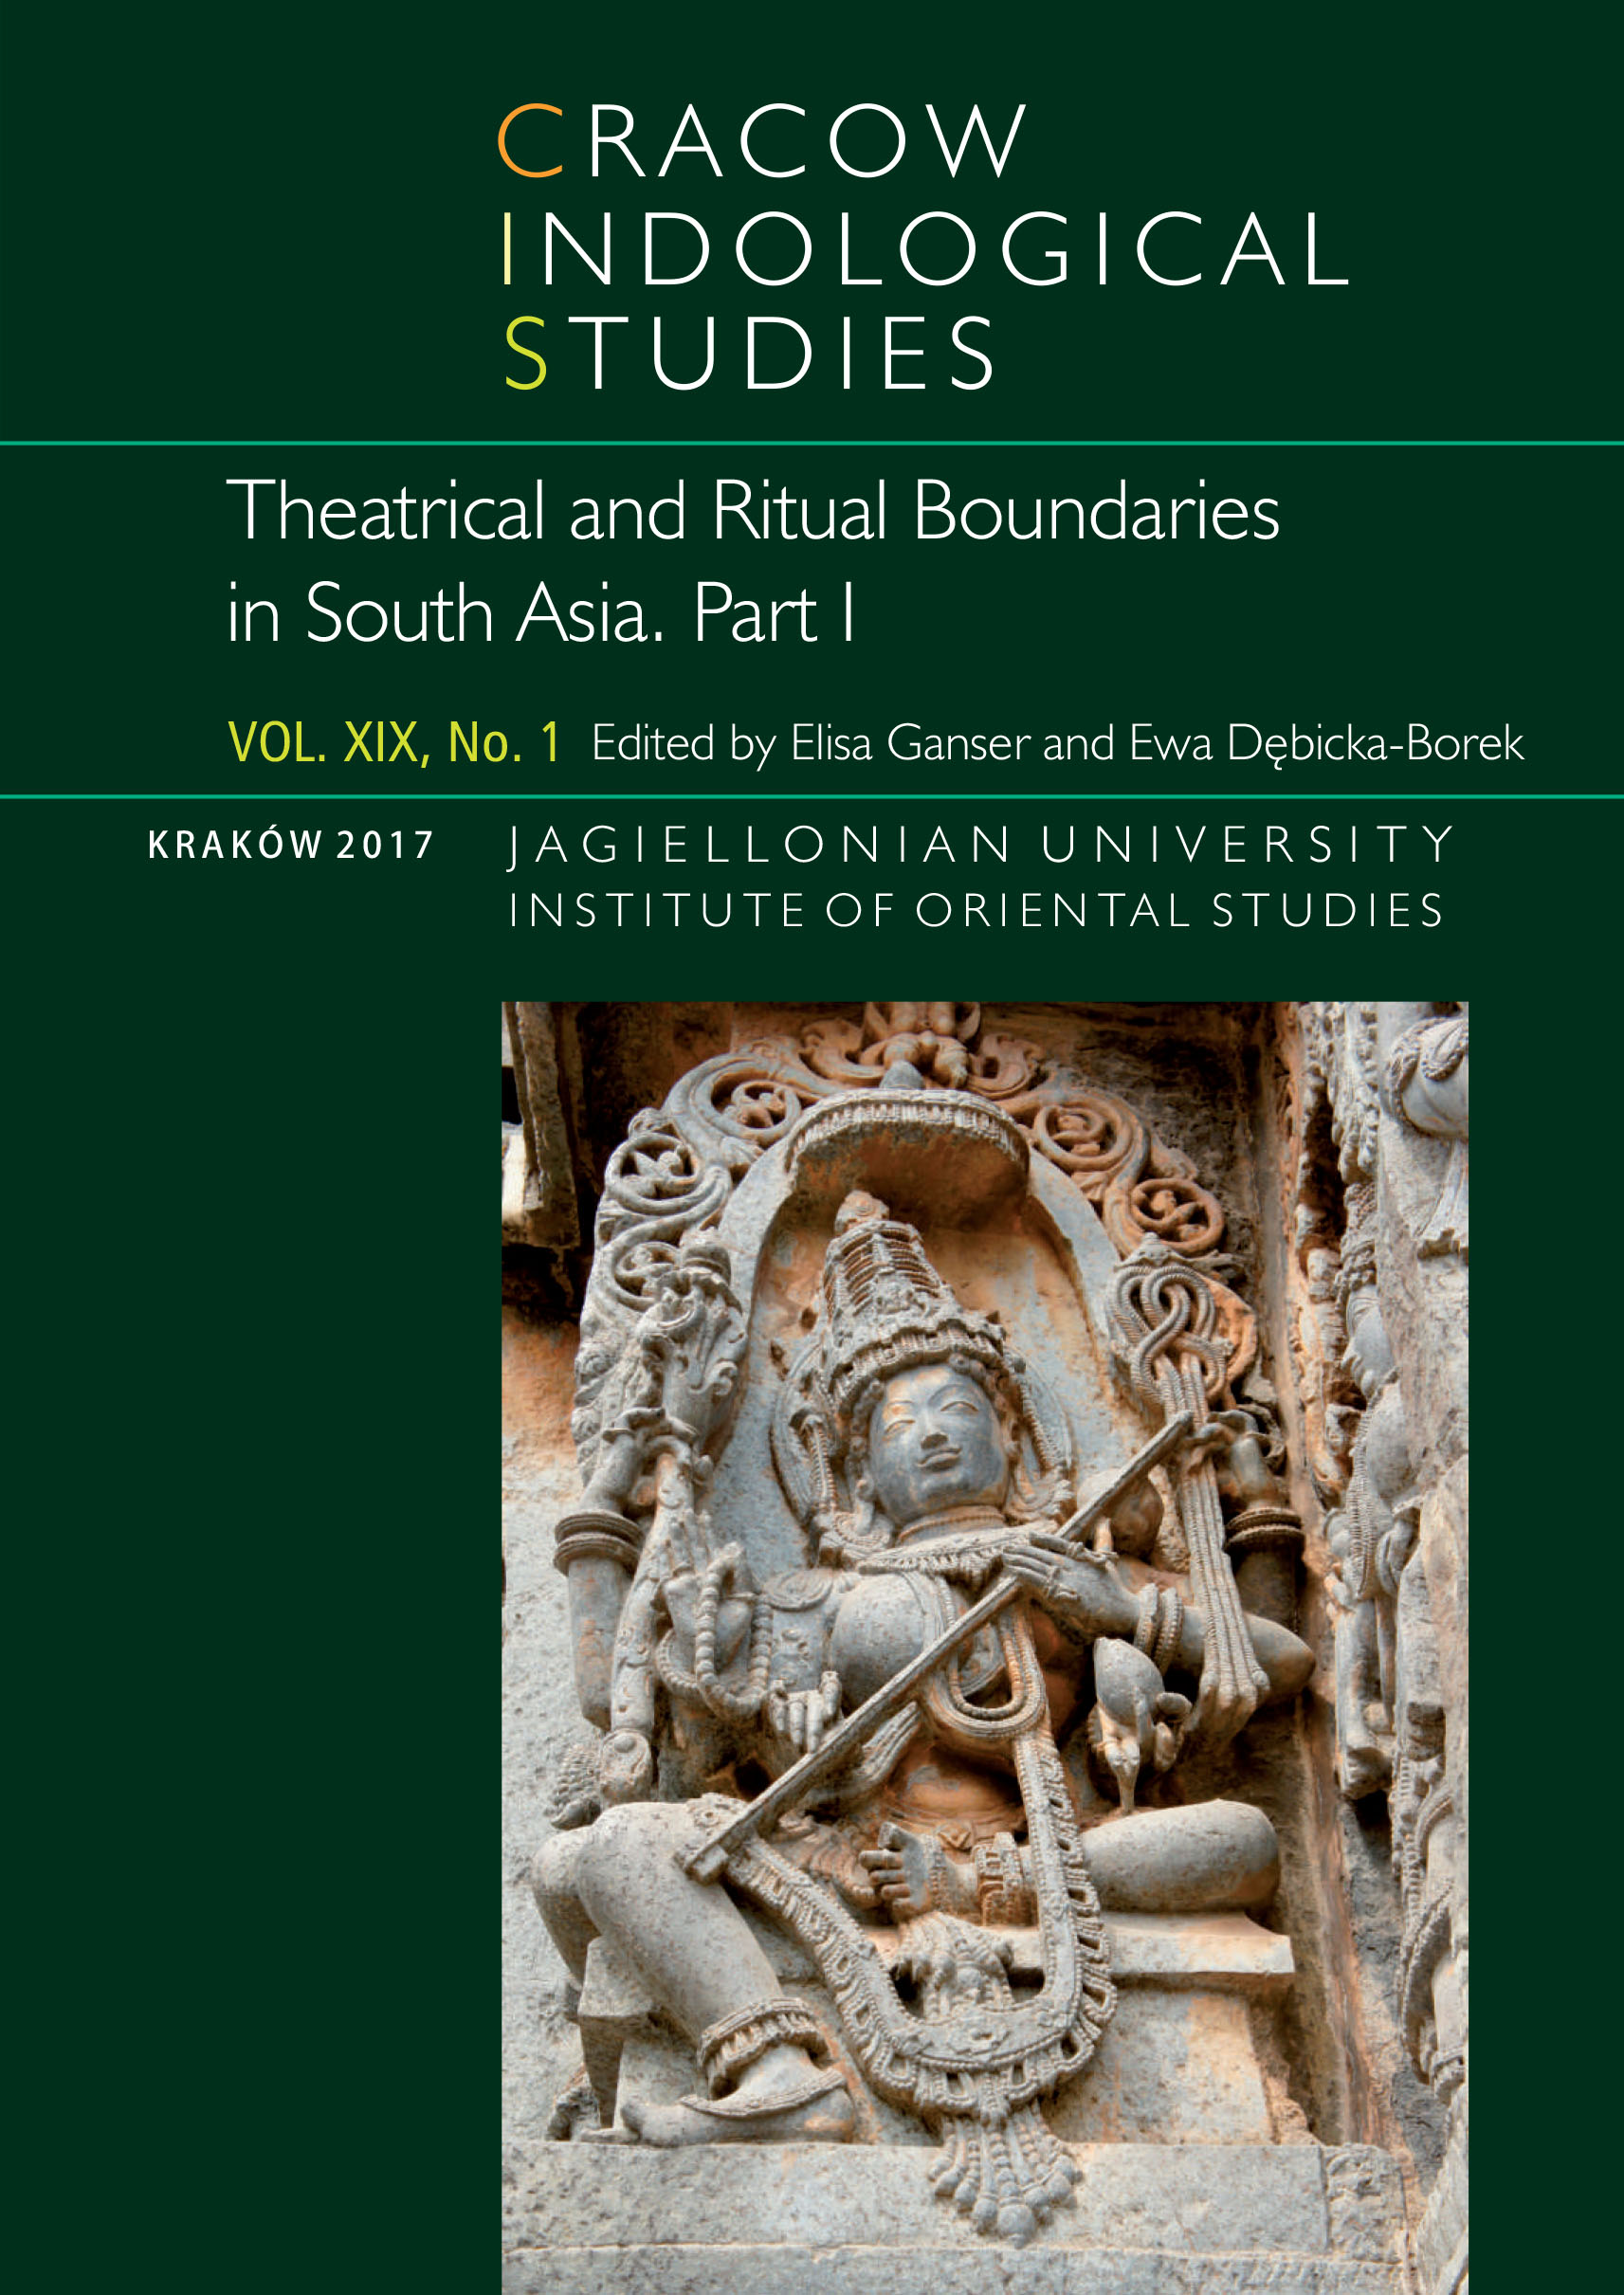 					View Vol. 19 No. 1 (2017): Theatrical and Ritual Boundaries in South Asia. Part I
				